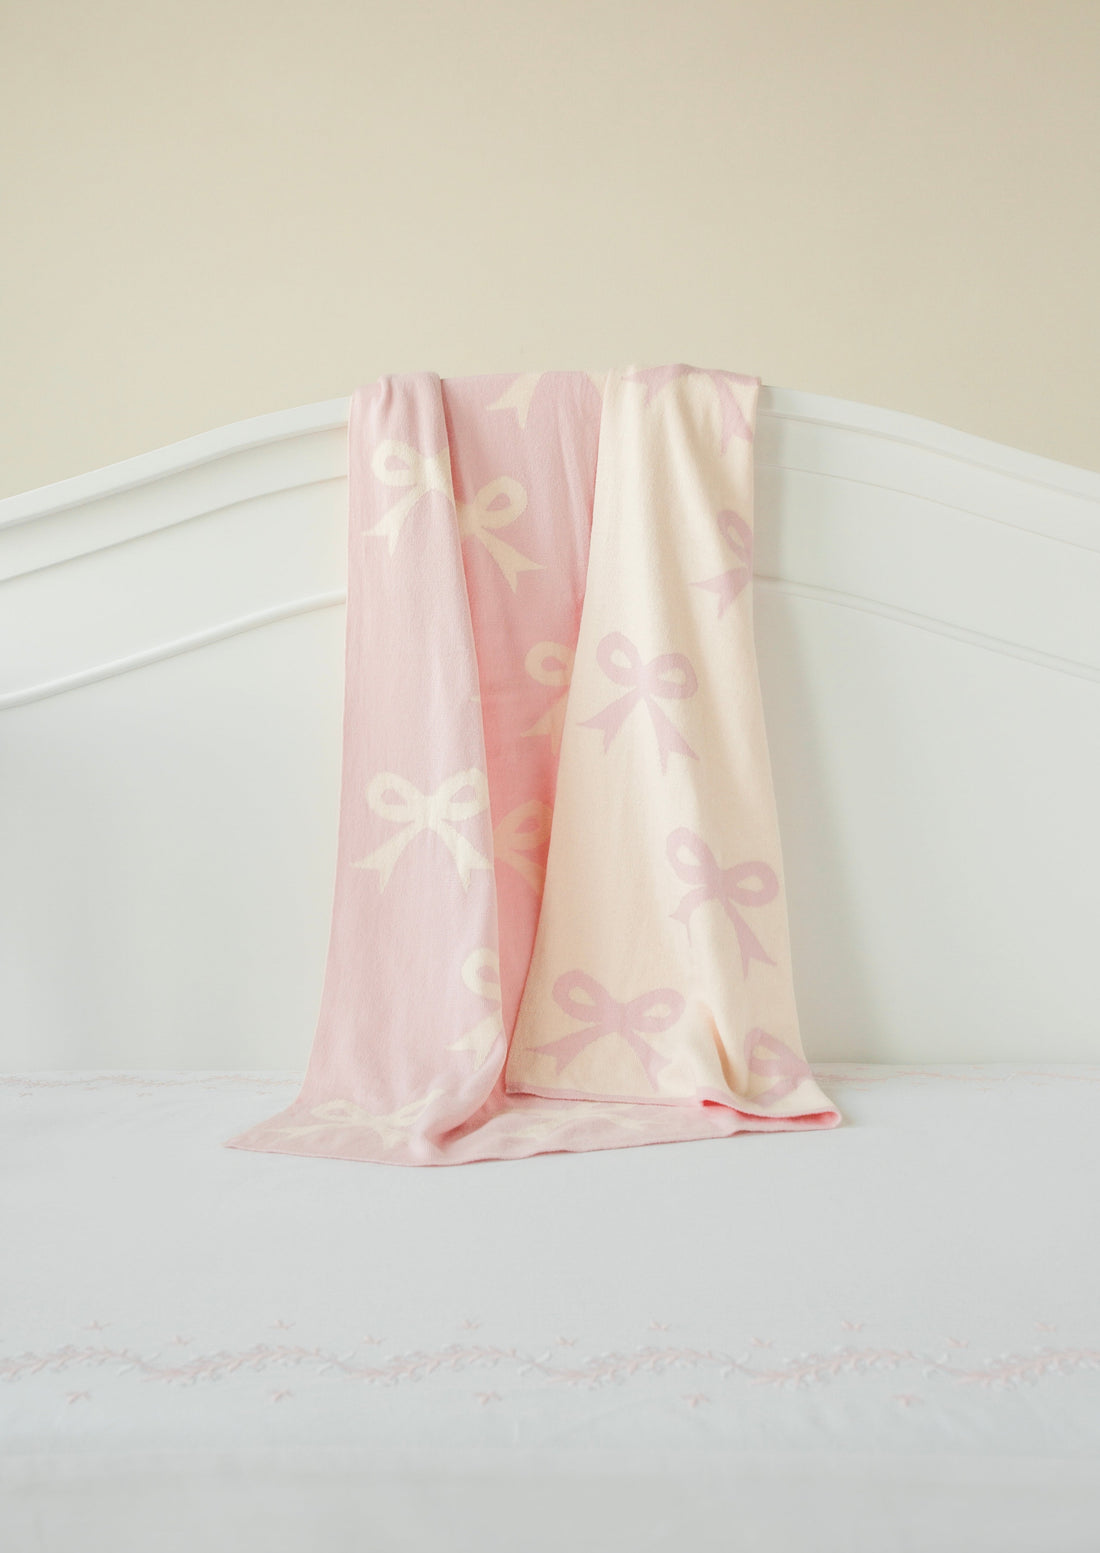 Little English giftable nursery accessory, reversible knit nursery blanket with light pink and cream bow print